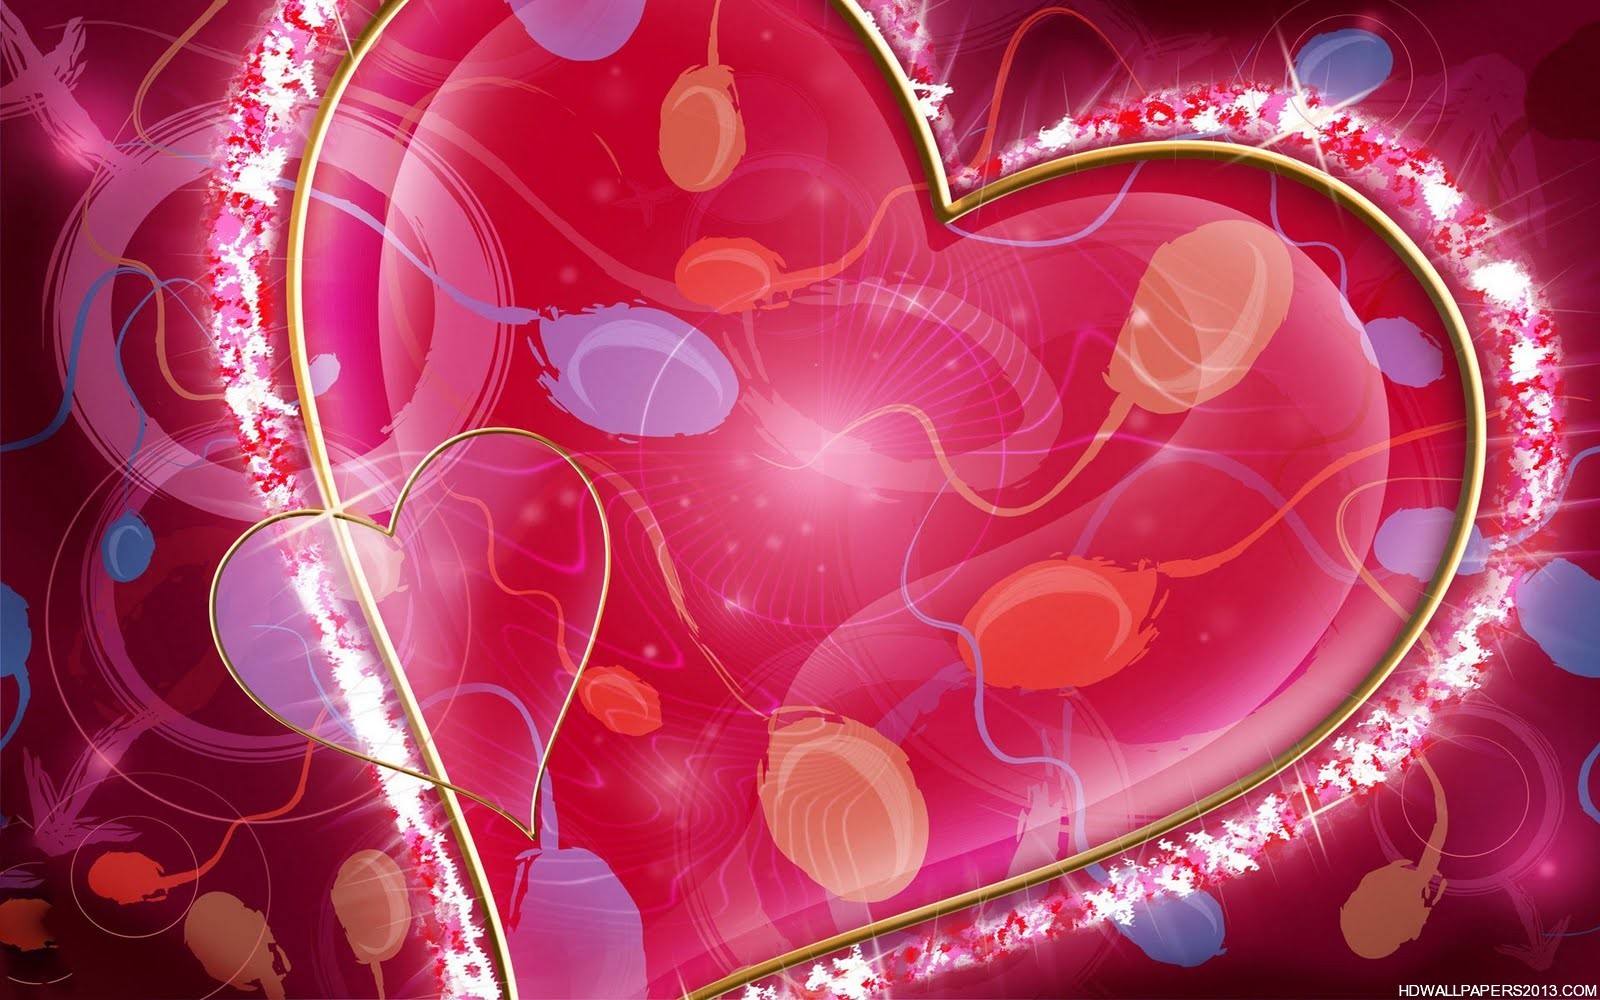 Romantic Wallpapers of Love HD Wallpapers Romantic Wallpapers of